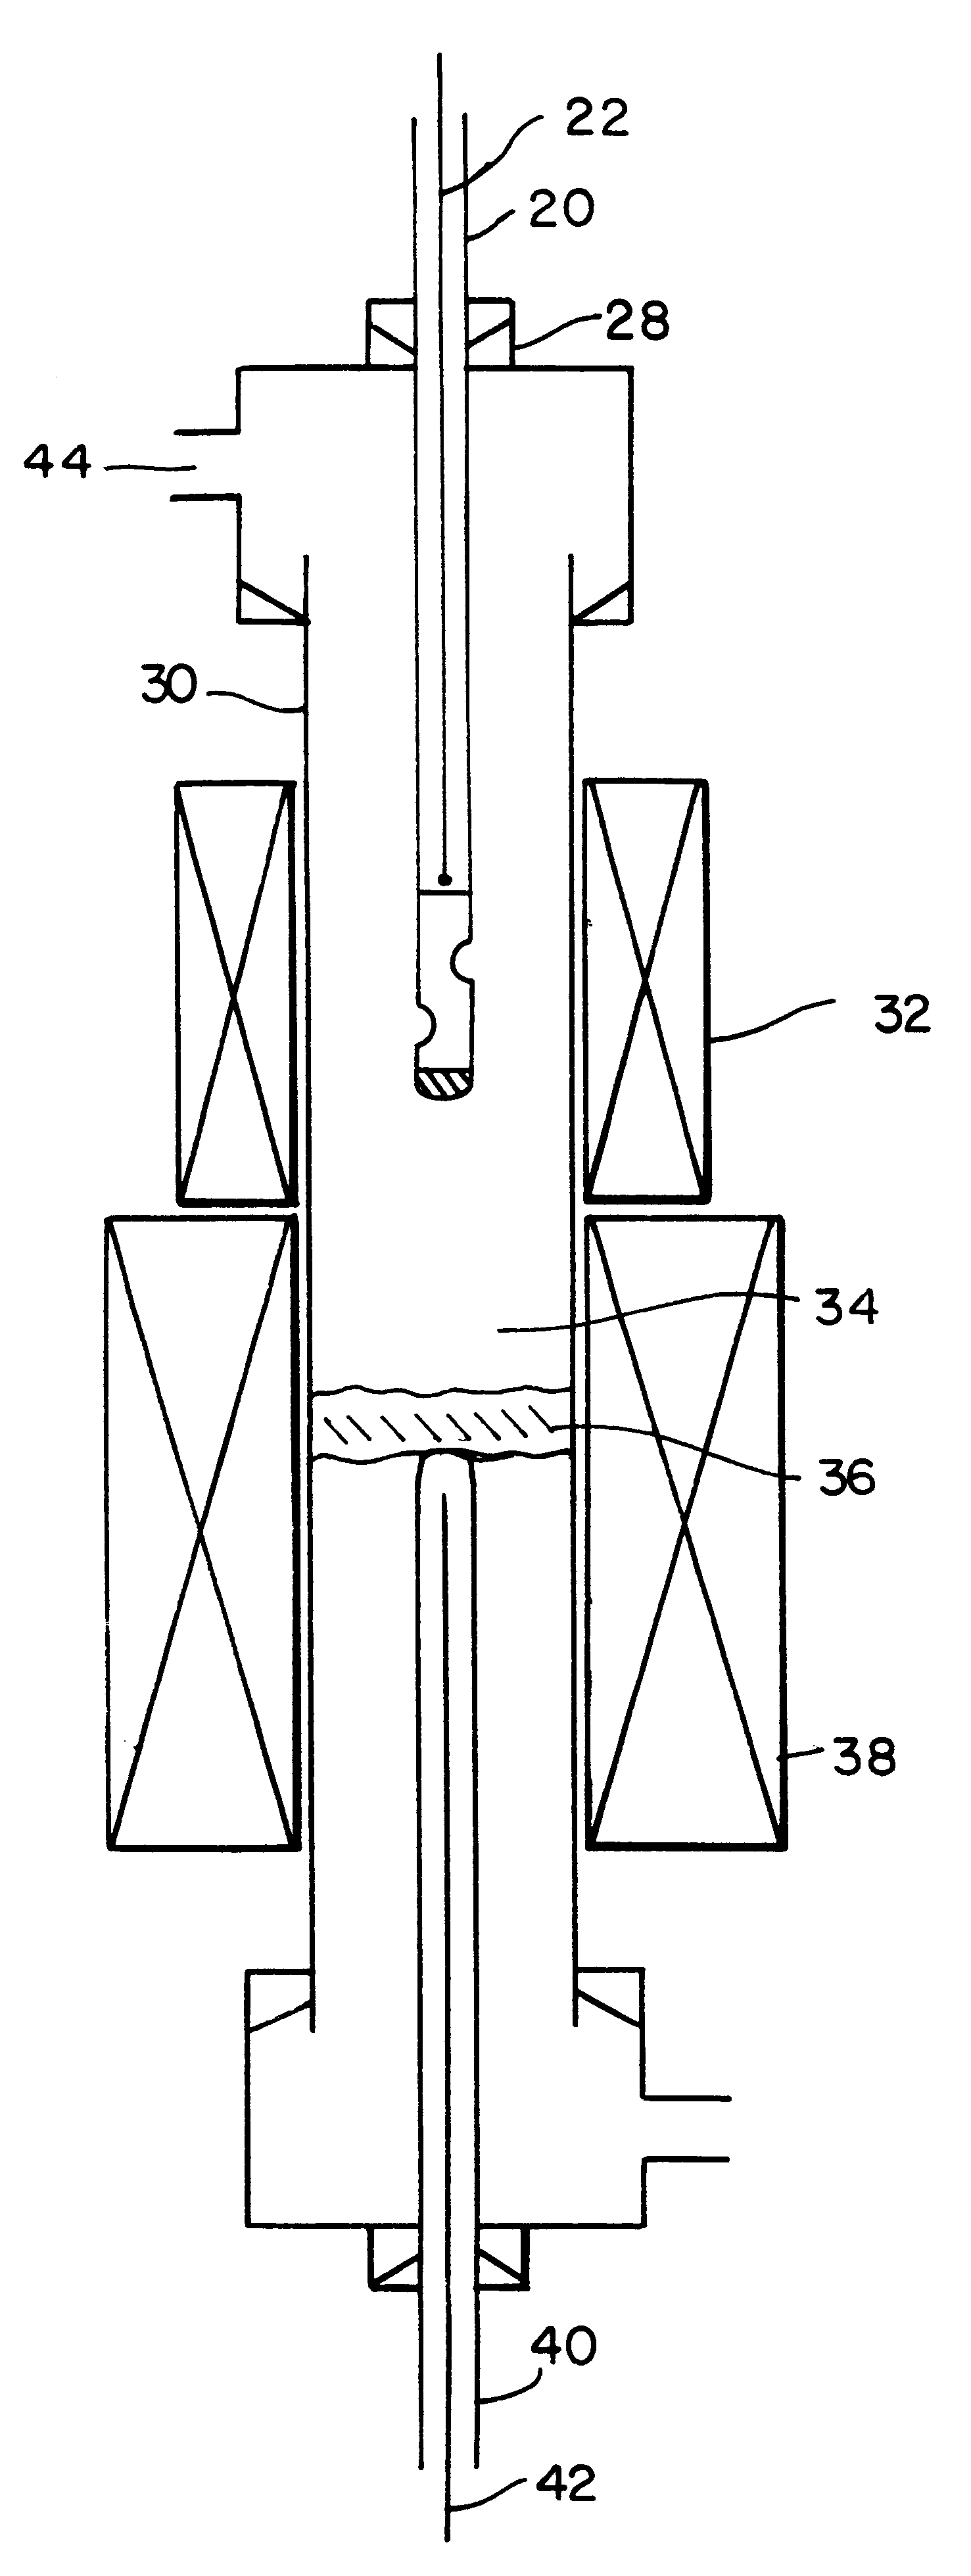 Process for producing single wall nanotubes using unsupported metal catalysts